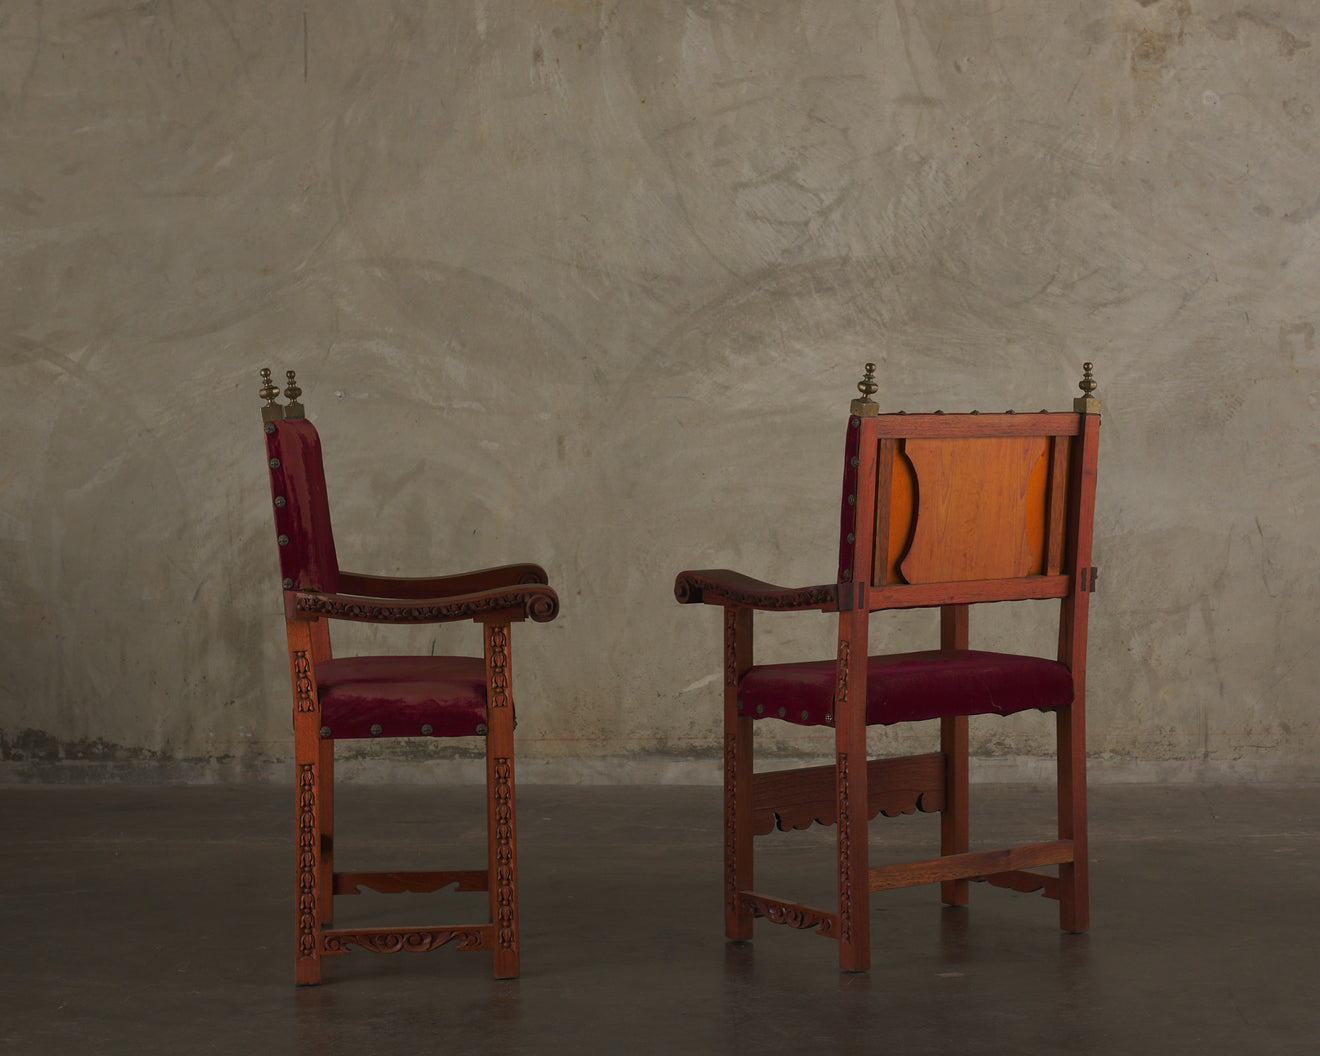 PAIR OF FRAILERO CHAIRS WITH ORIGINAL UPHOLSTERY